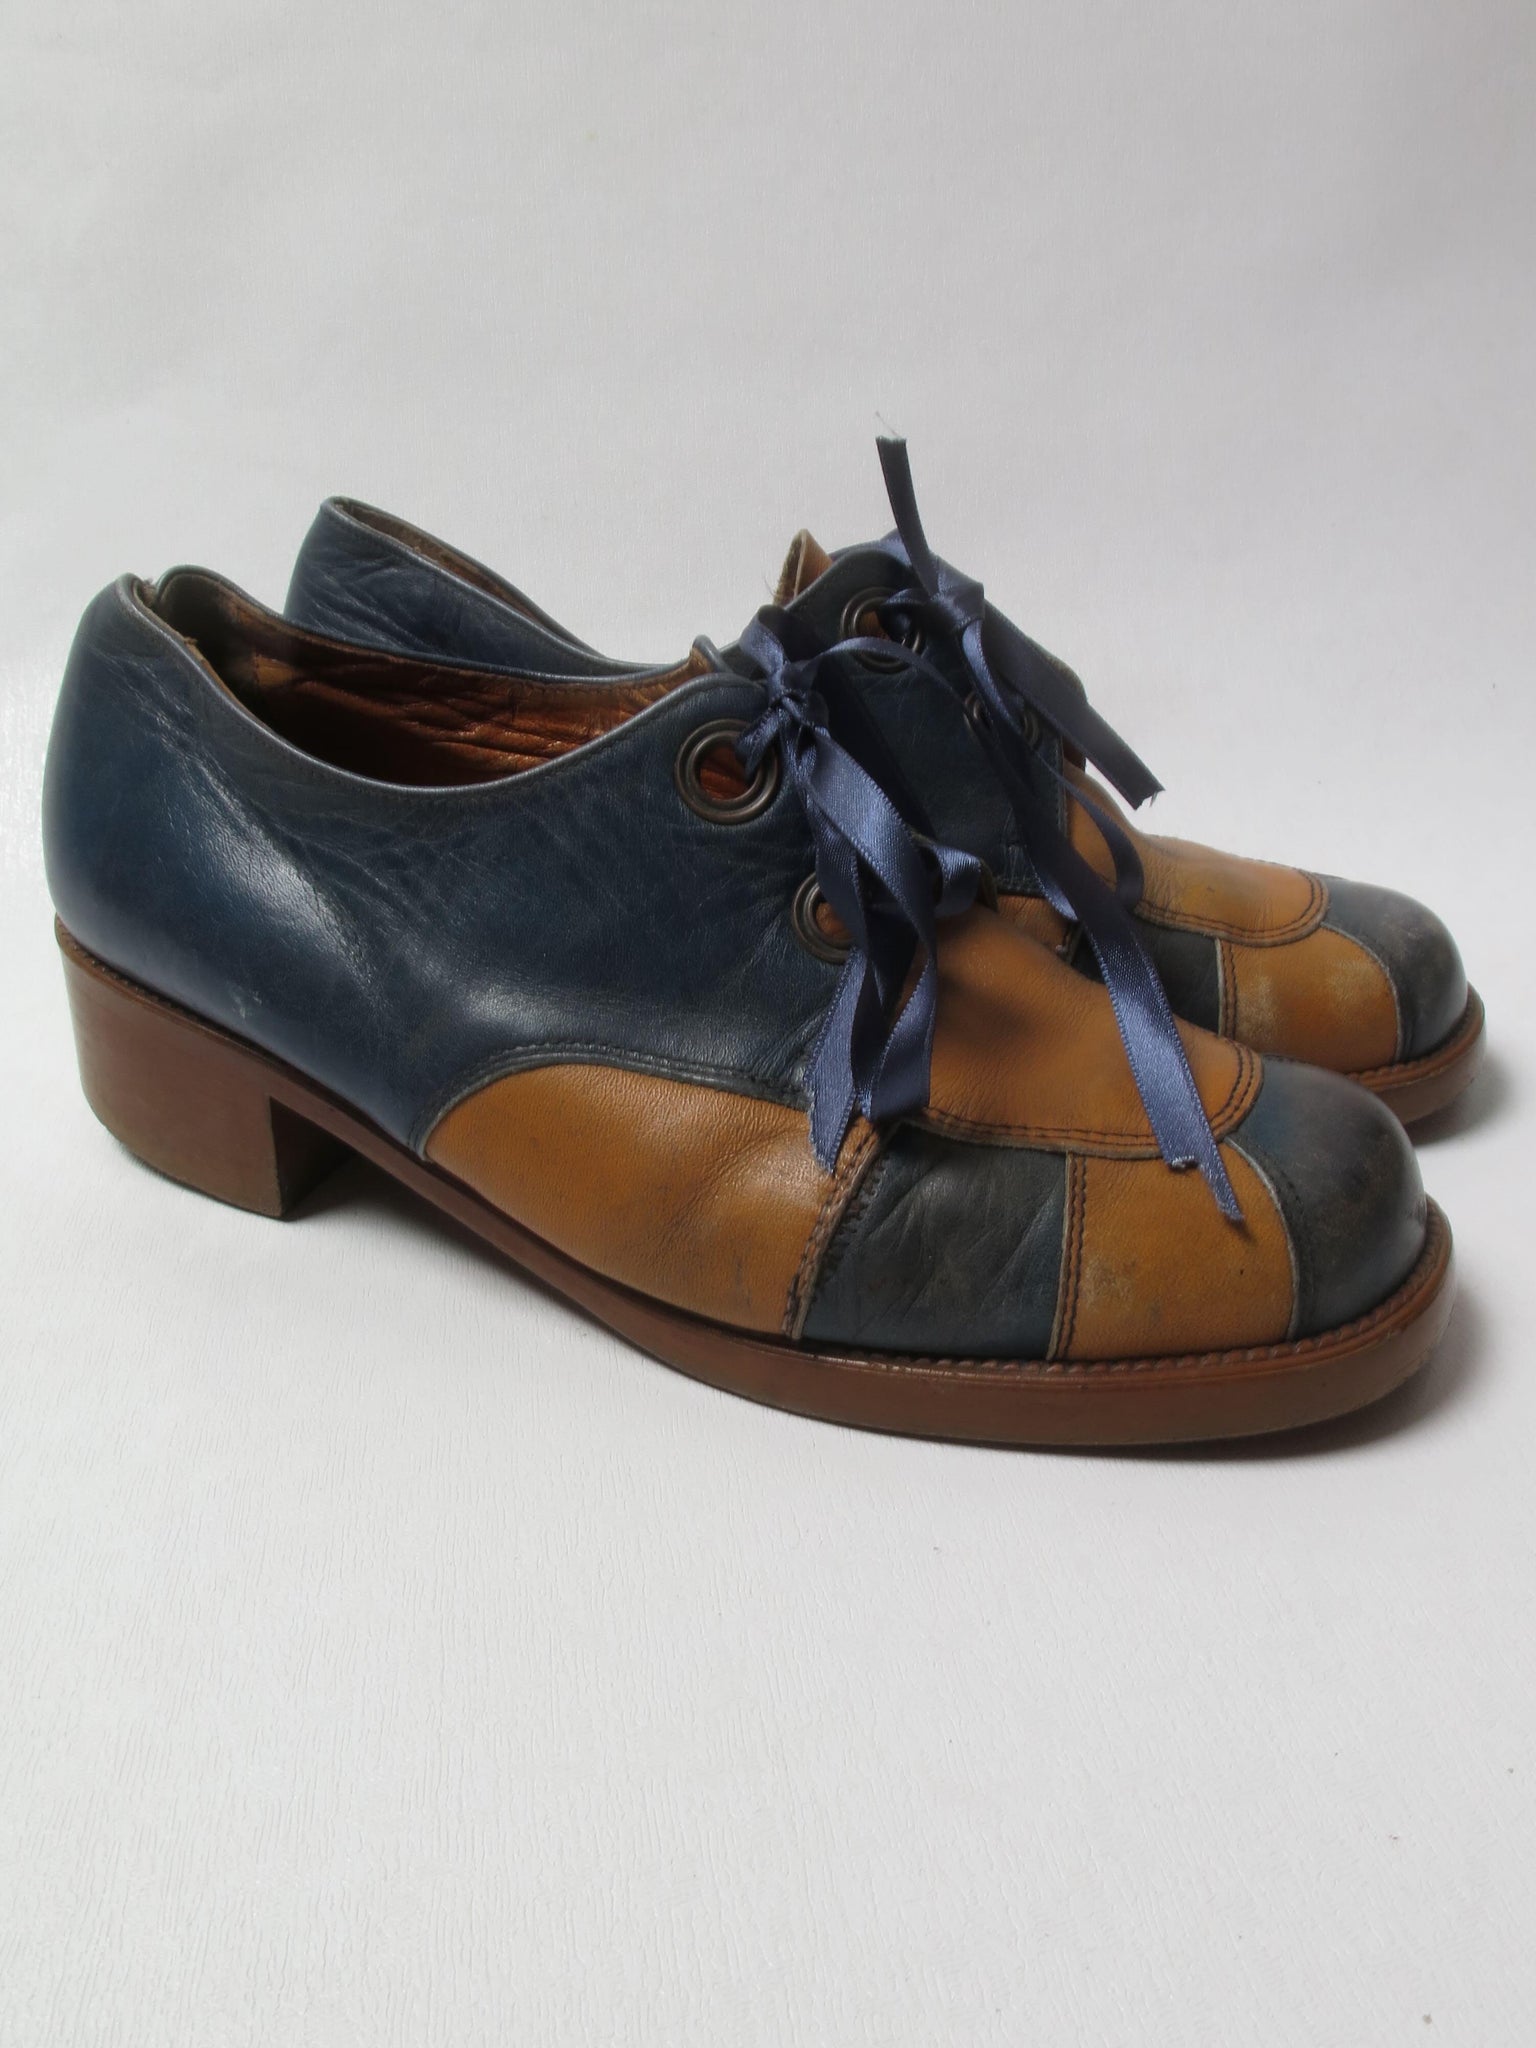 Blue & Tan Lace Up Vintage 1970s Shoes 37/4 - The Harlequin